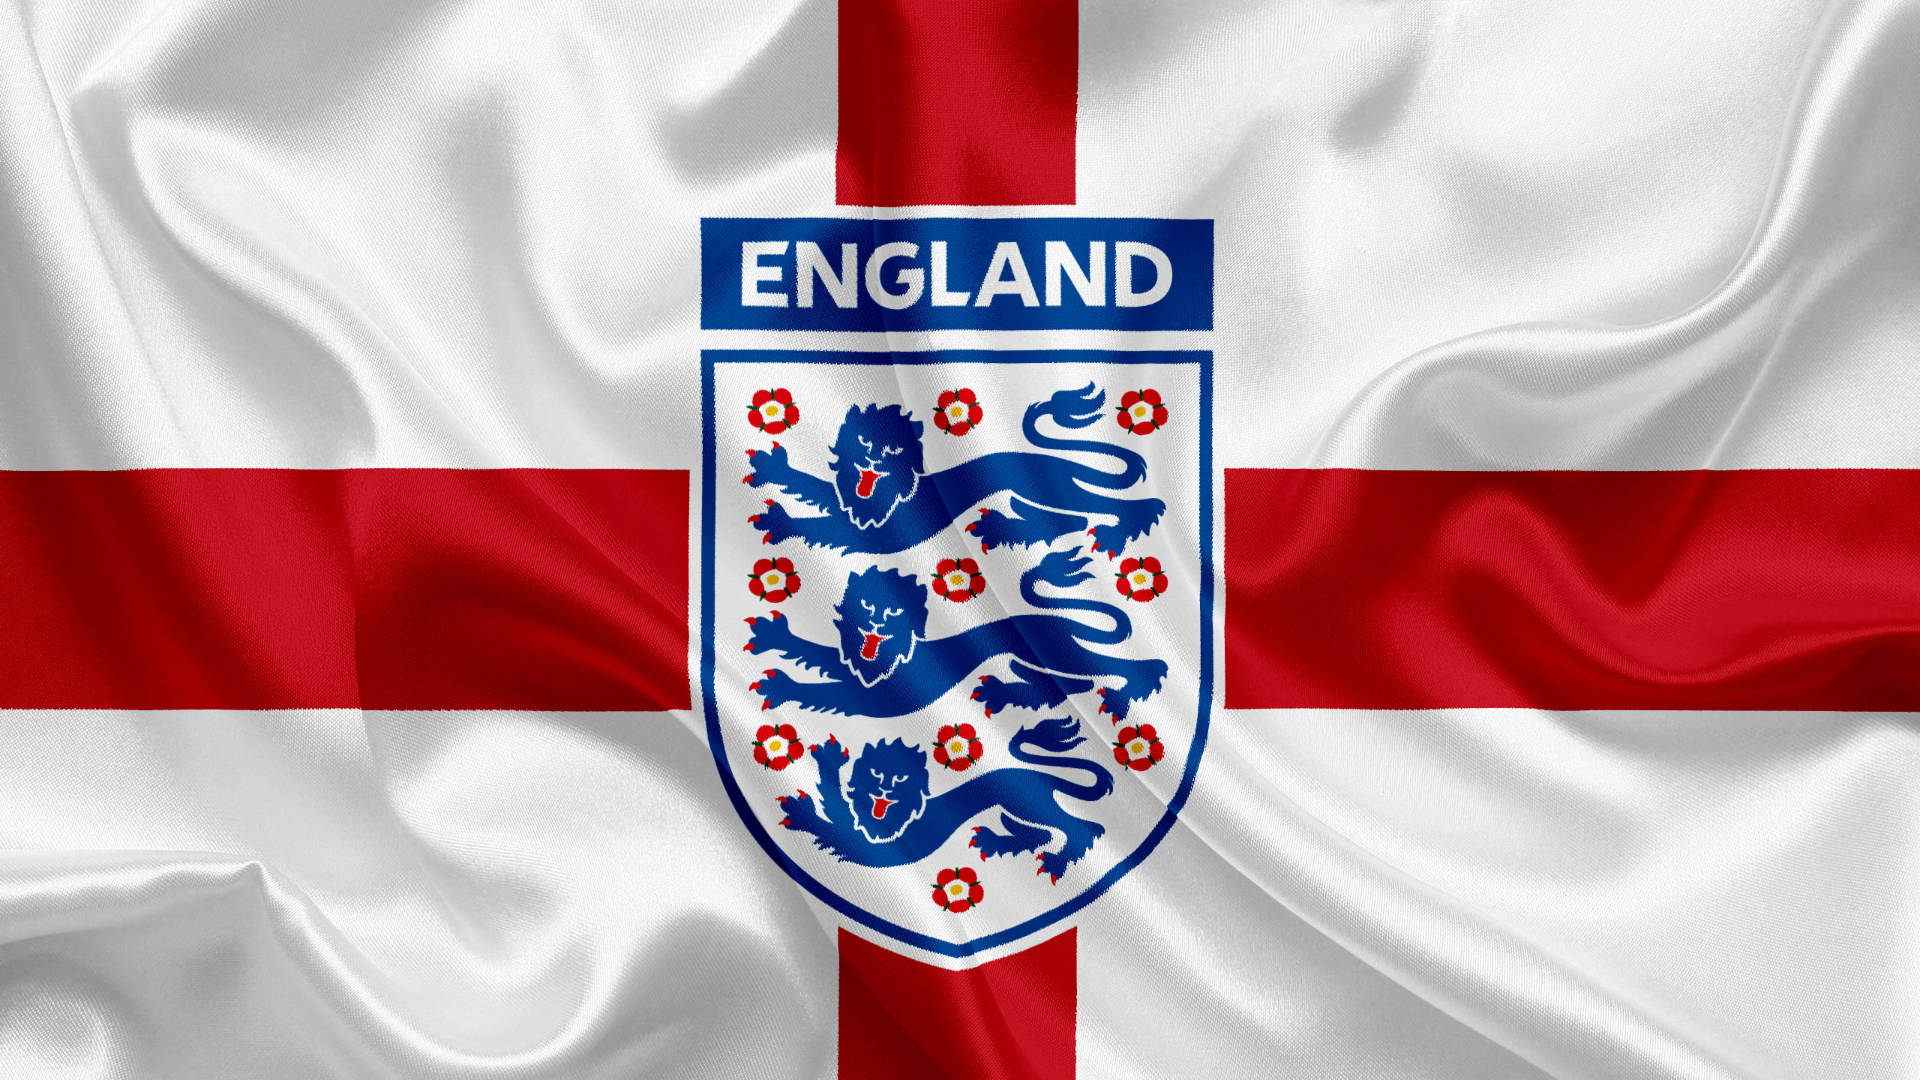 England Football Crest English Flag Picture